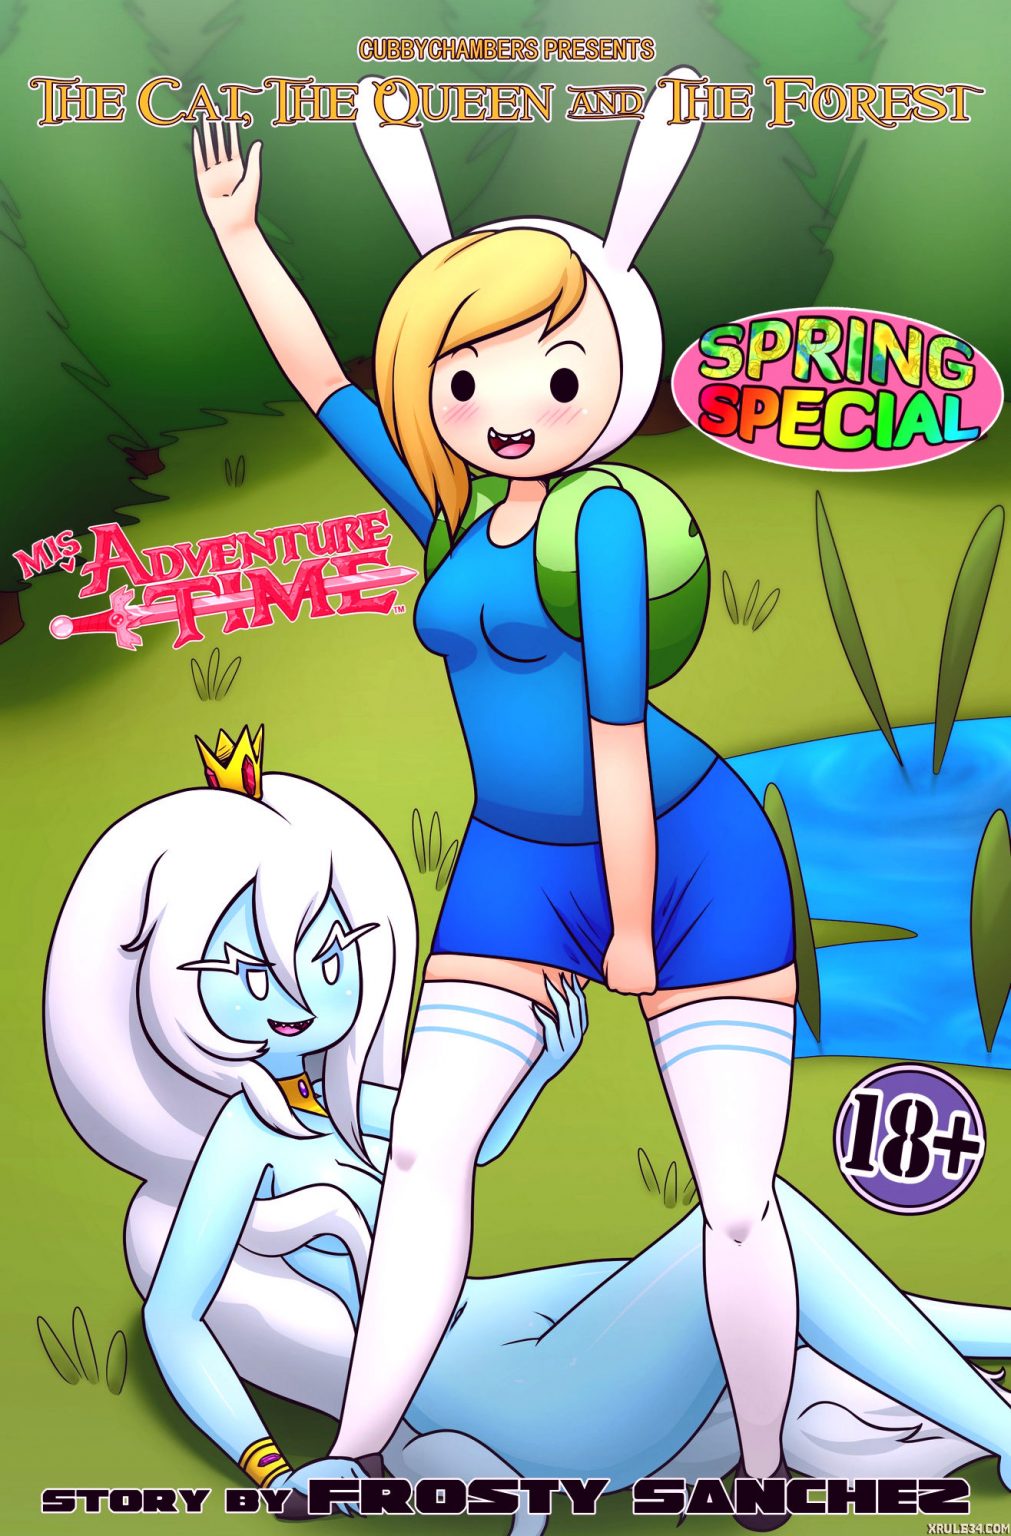 MisAdventure Time Spring Special: The Cat, the Queen, and the Forest